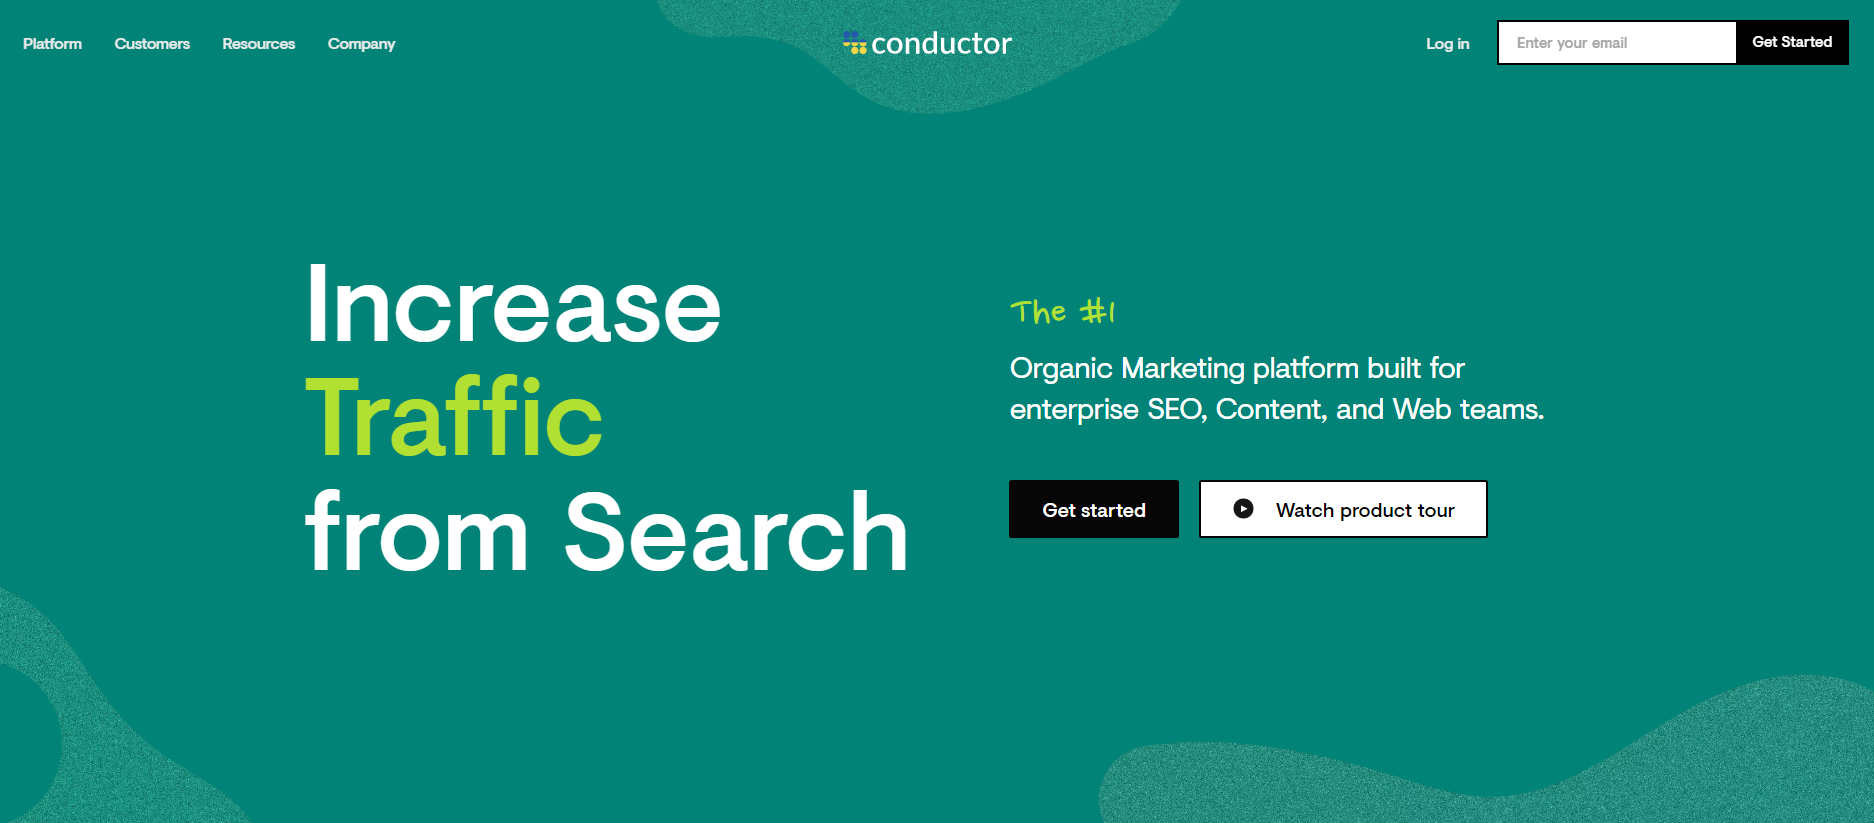 conductor, one of the best seo enterprise tools